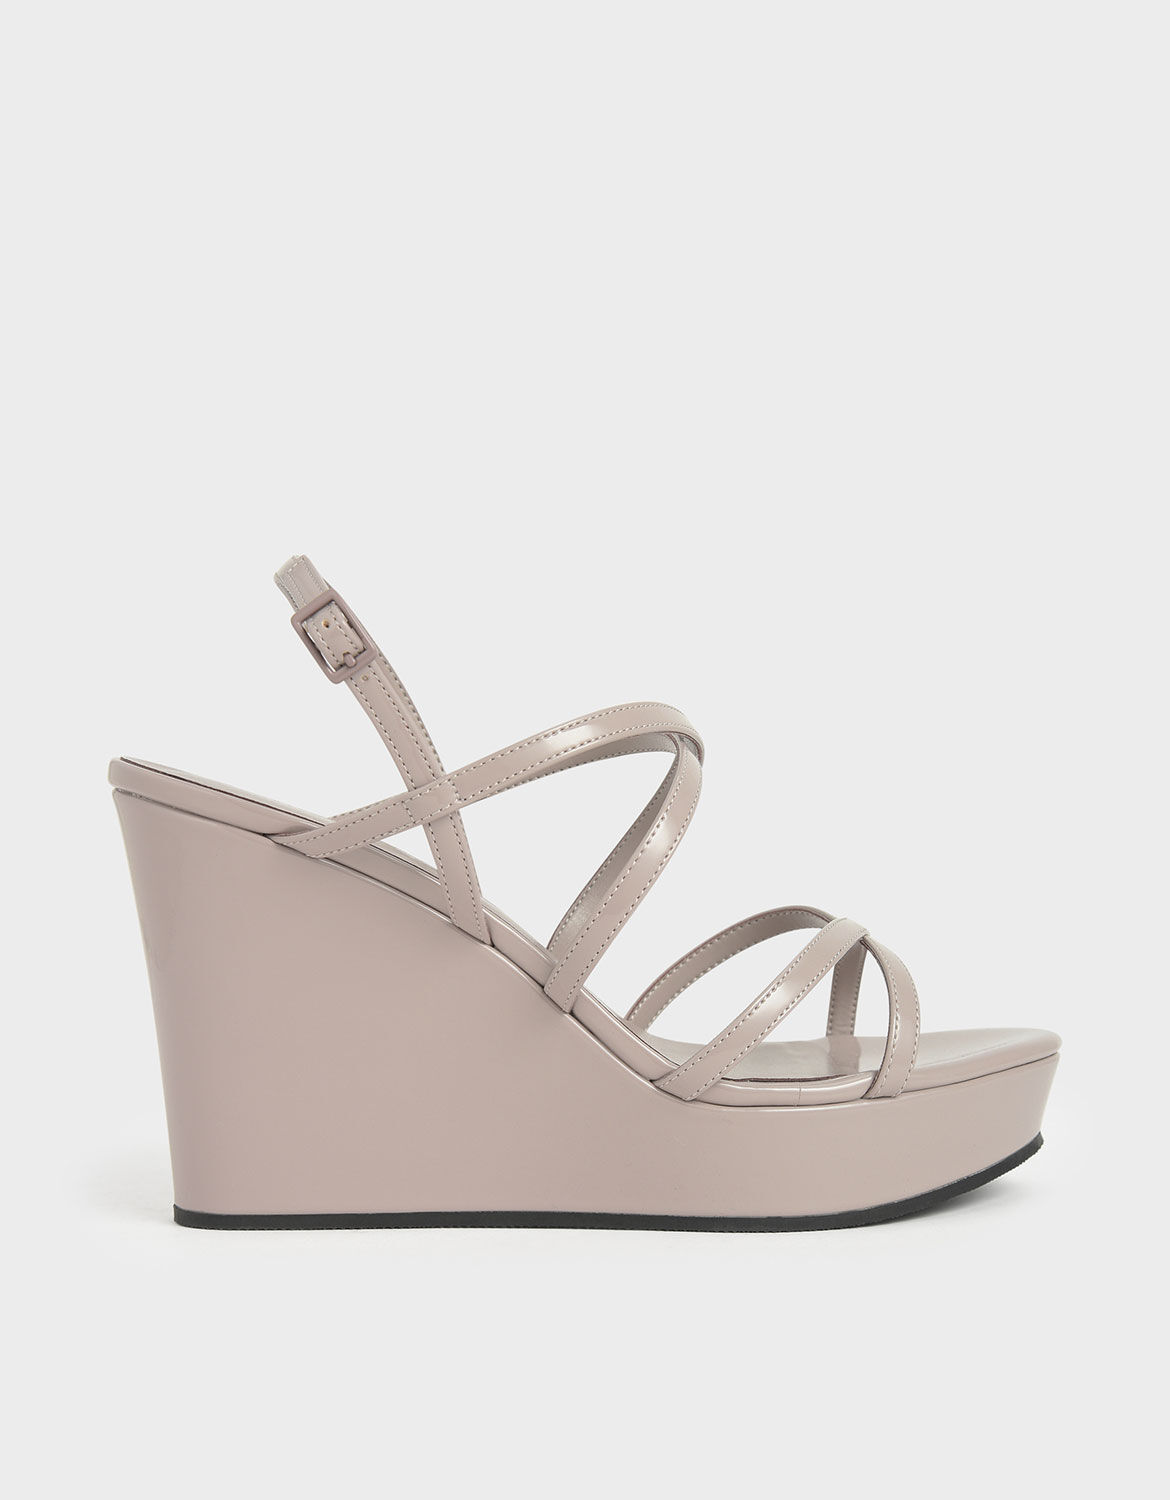 Nude Patent Strappy Platform Wedges 